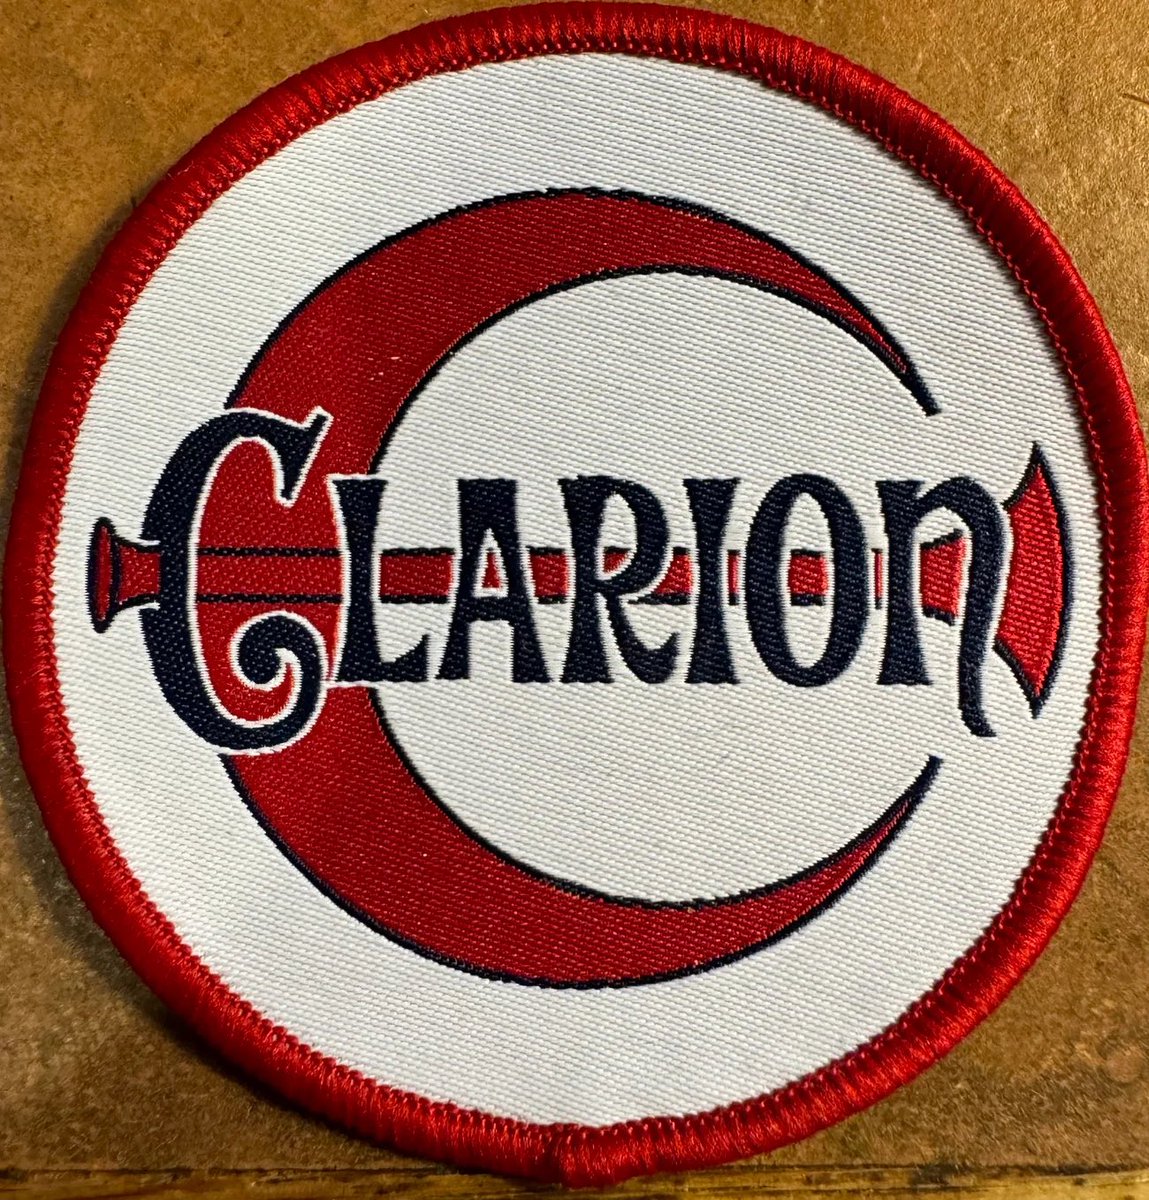 A new Clarion Sew On Badge is now available to buy through our club shop. The design was first used by the Clarion football club in the 1920’s. #football #clarioncycling #fellowshipislife #badge londonclarioncycleclub.bigcartel.com/product/sew-on…